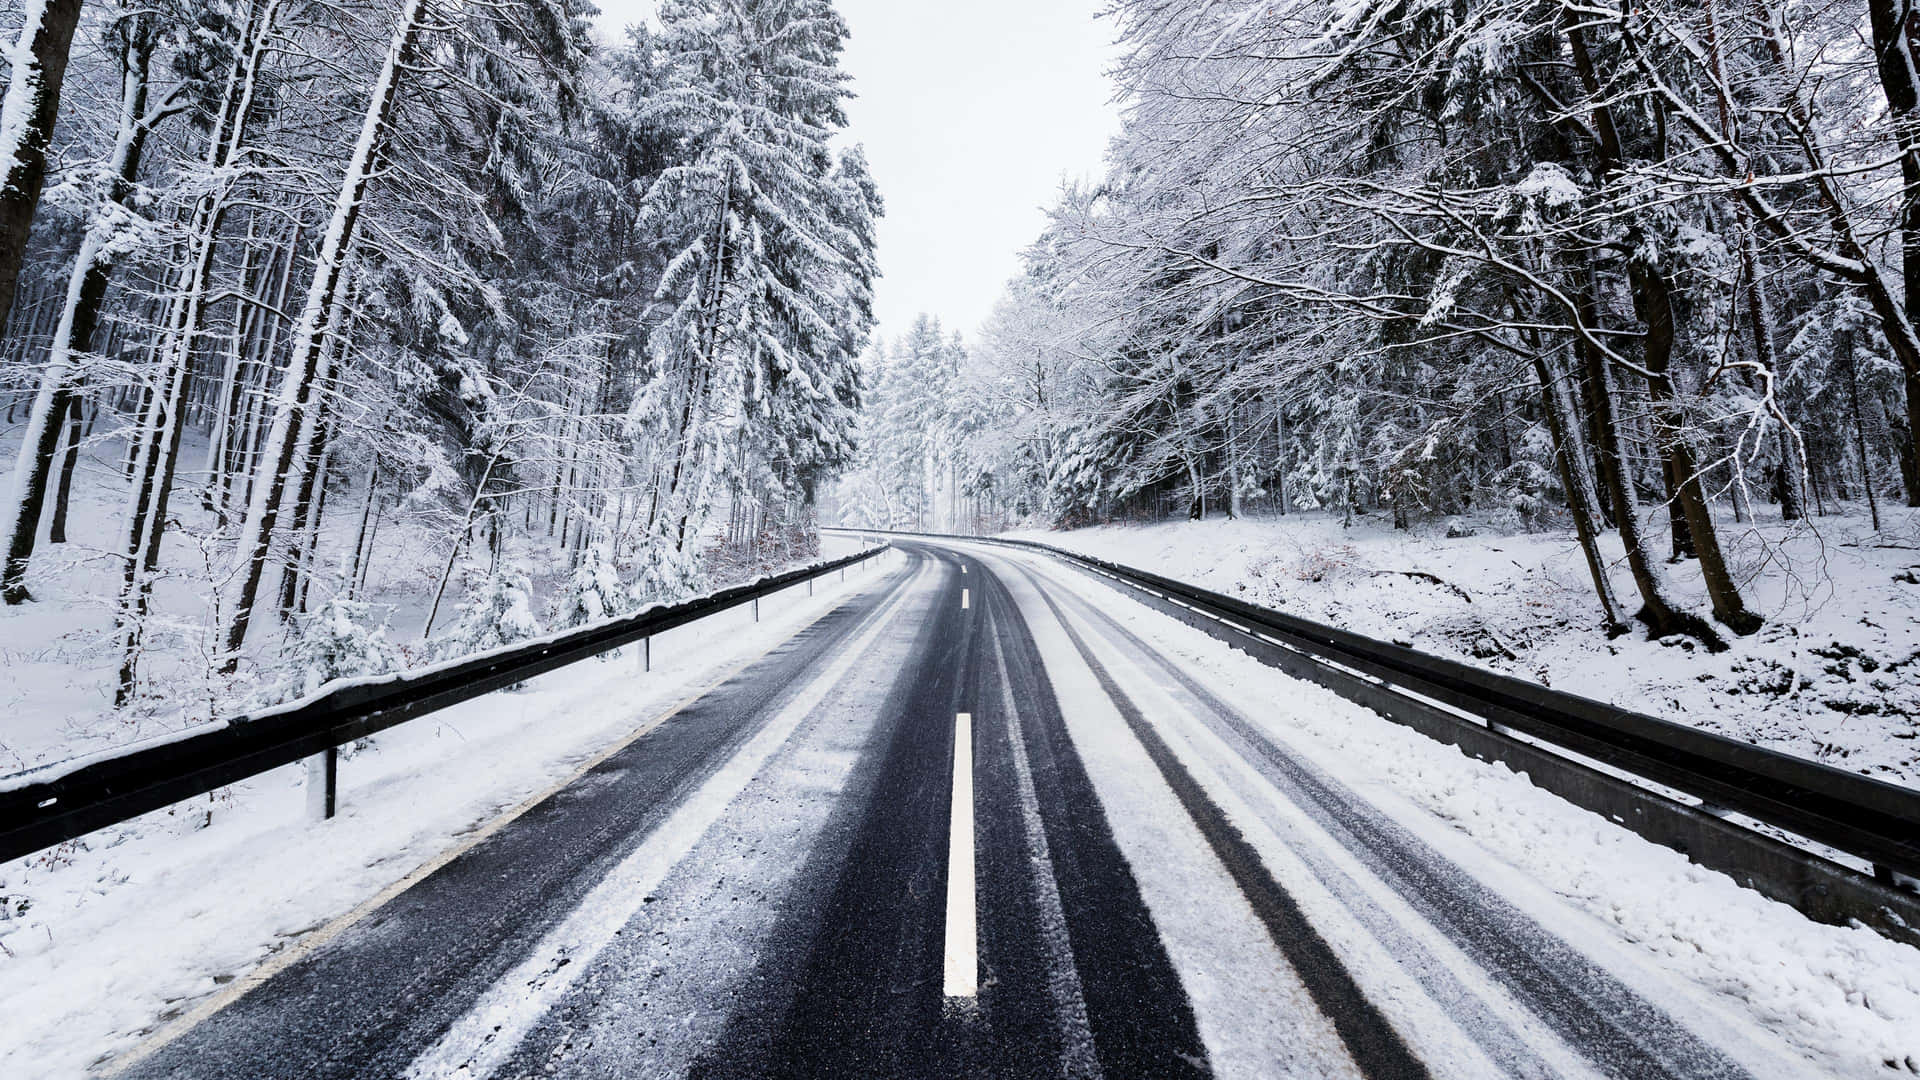 Winter Wonderland - A Snow-Covered Icy Road Wallpaper